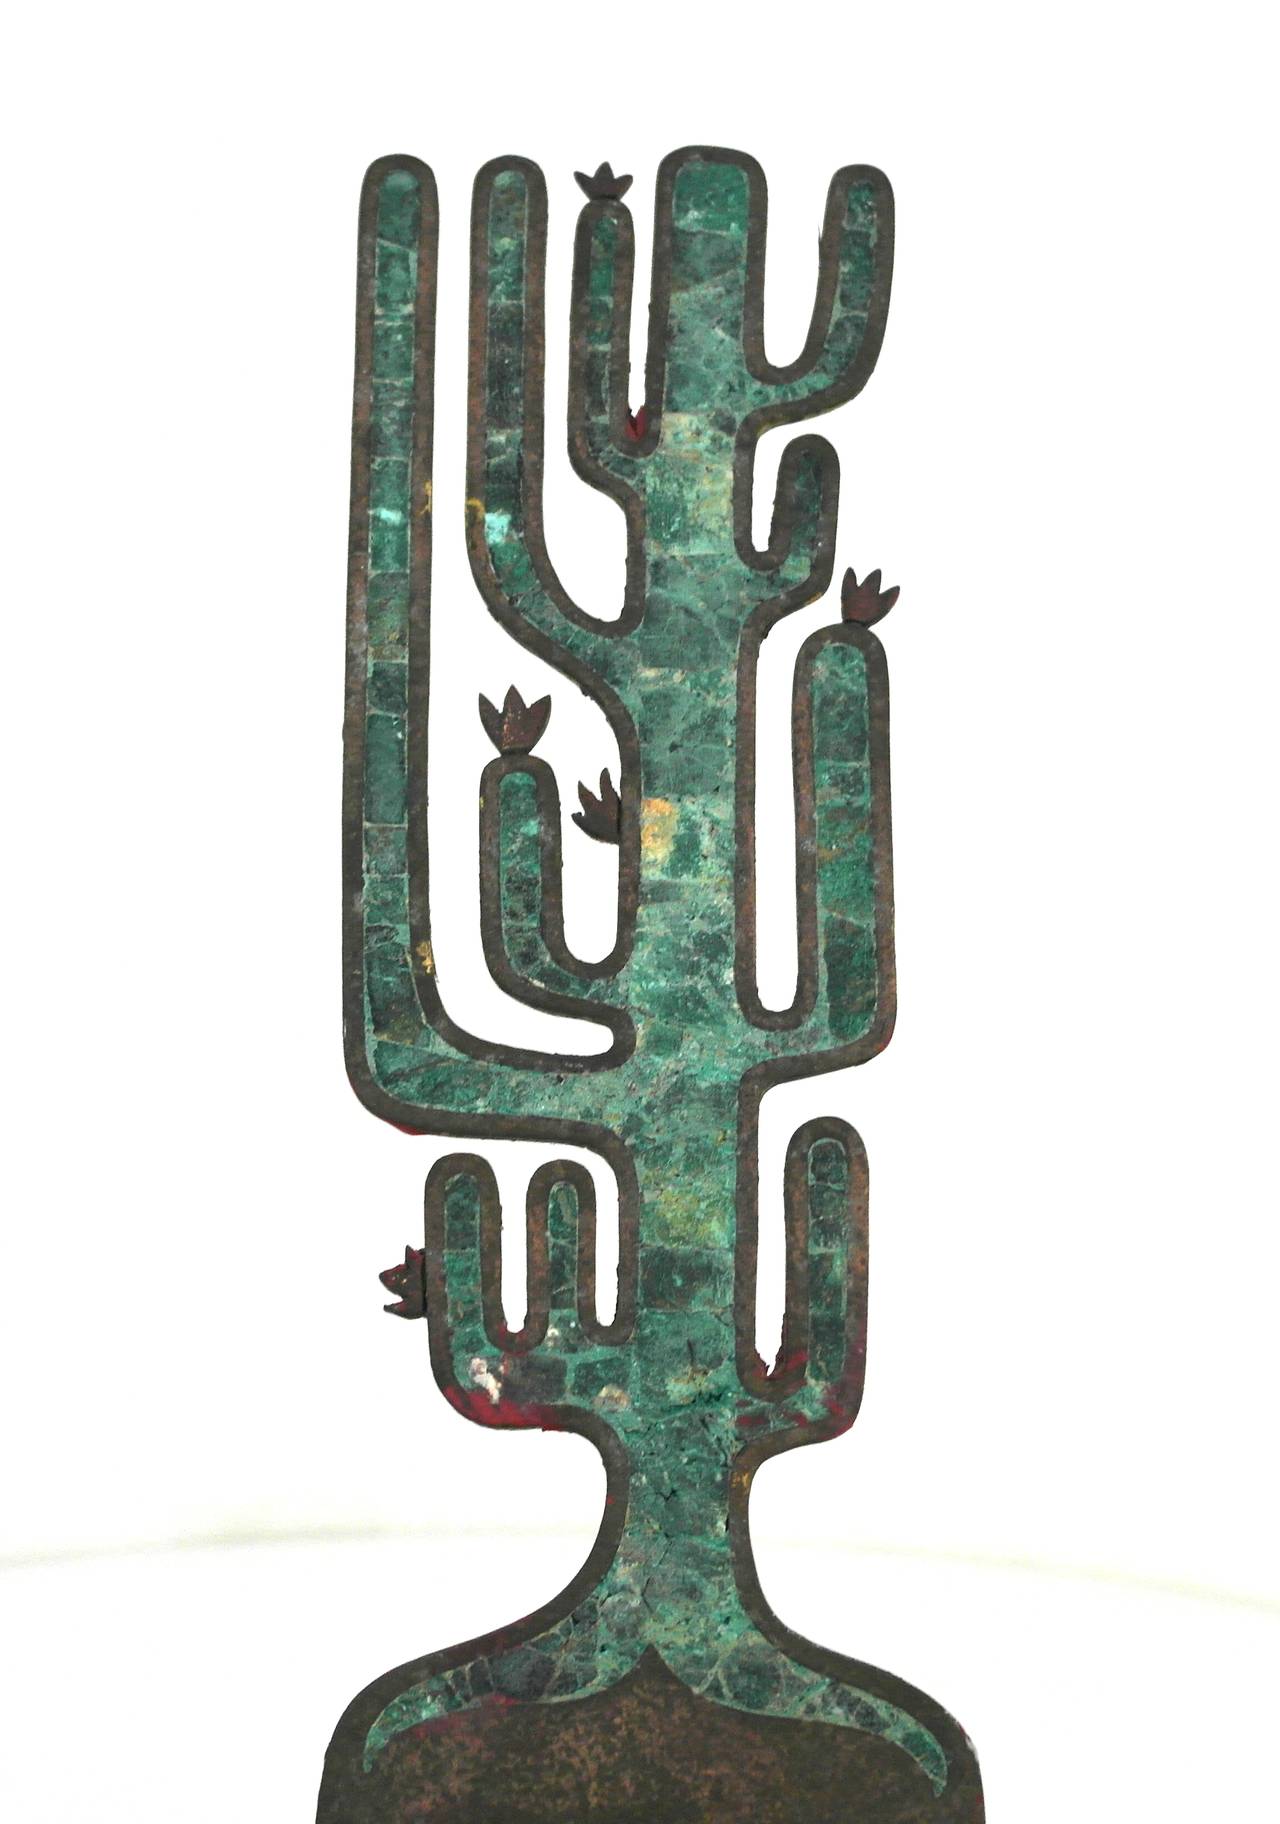 Being offered is an impressive circa 1950s door plate by Rancho Alegre of Taxco, Mexico. Heavy brass door plate in the form of a large cactus with azur malachite inlay. Dimensions: 12 inches tall x 2 1/2 inches wide. Marked as illustrated. In